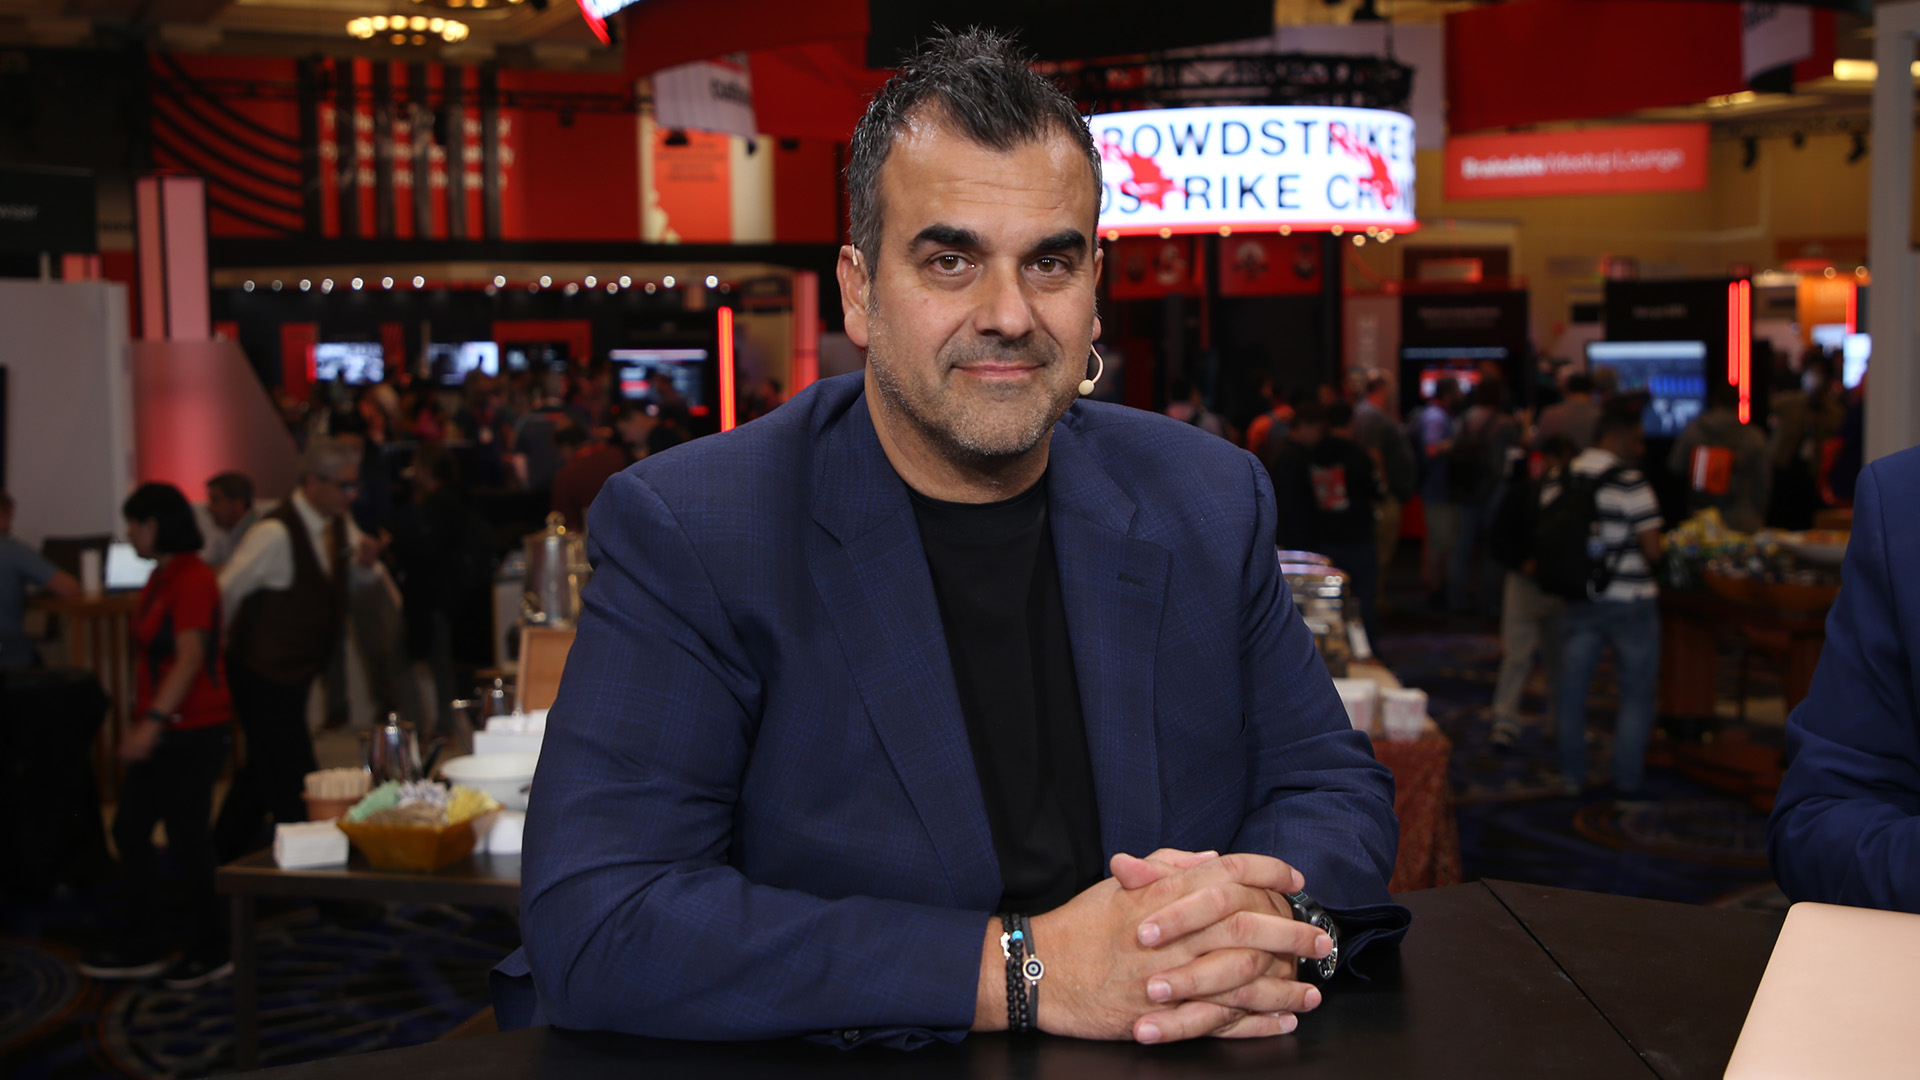 CrowdStrike eyes generative AI to revolutionize cybersecurity: A one-on-one with president Mike Sentonas